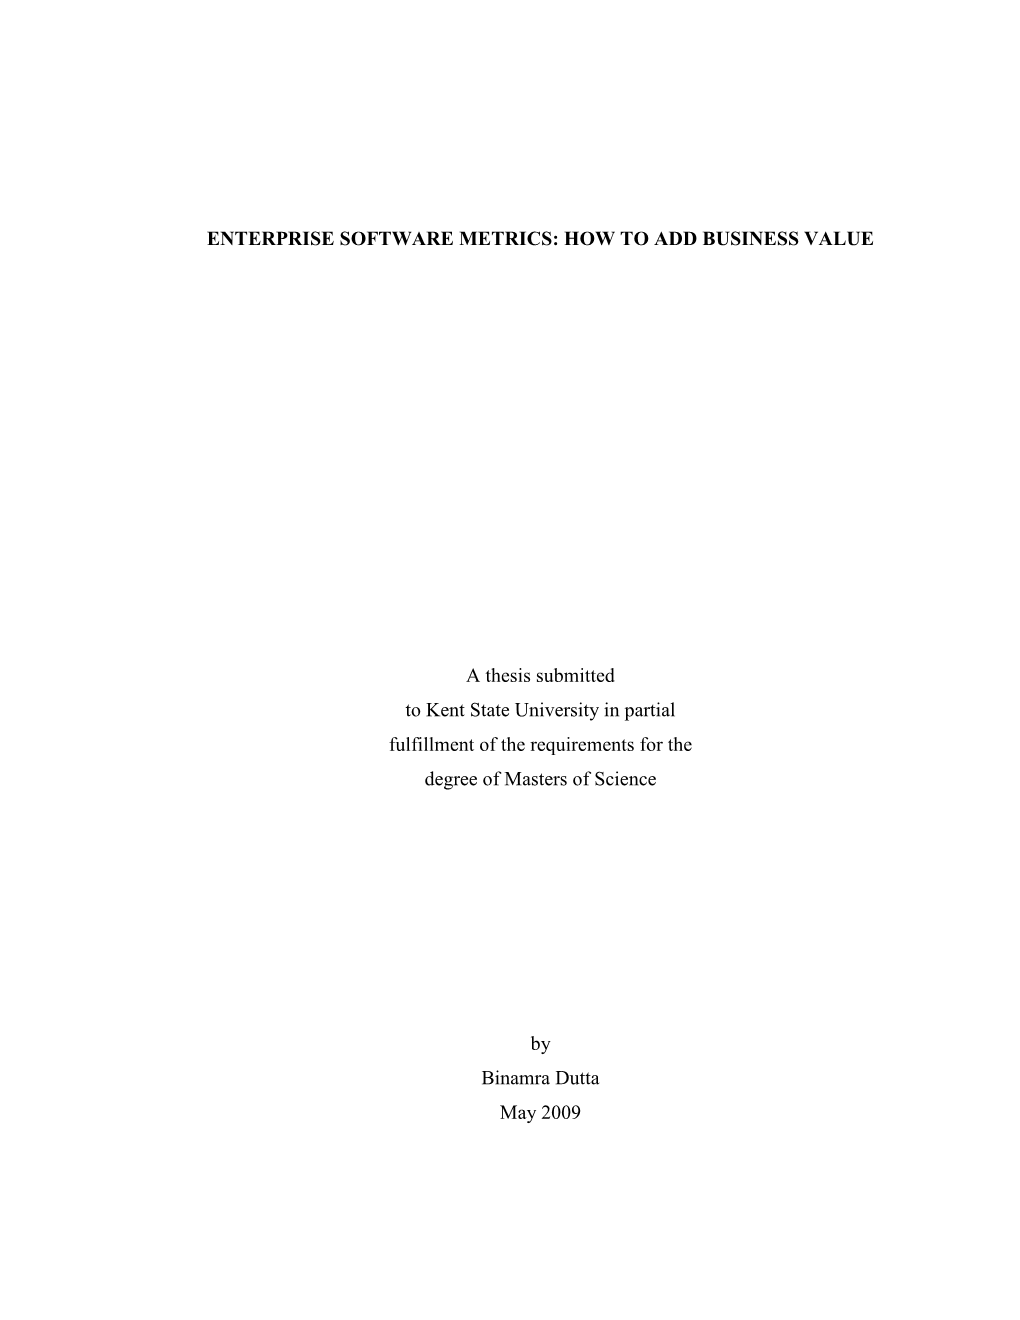 ENTERPRISE SOFTWARE METRICS: HOW to ADD BUSINESS VALUE a Thesis Submitted to Kent State University in Partial Fulfillment of Th